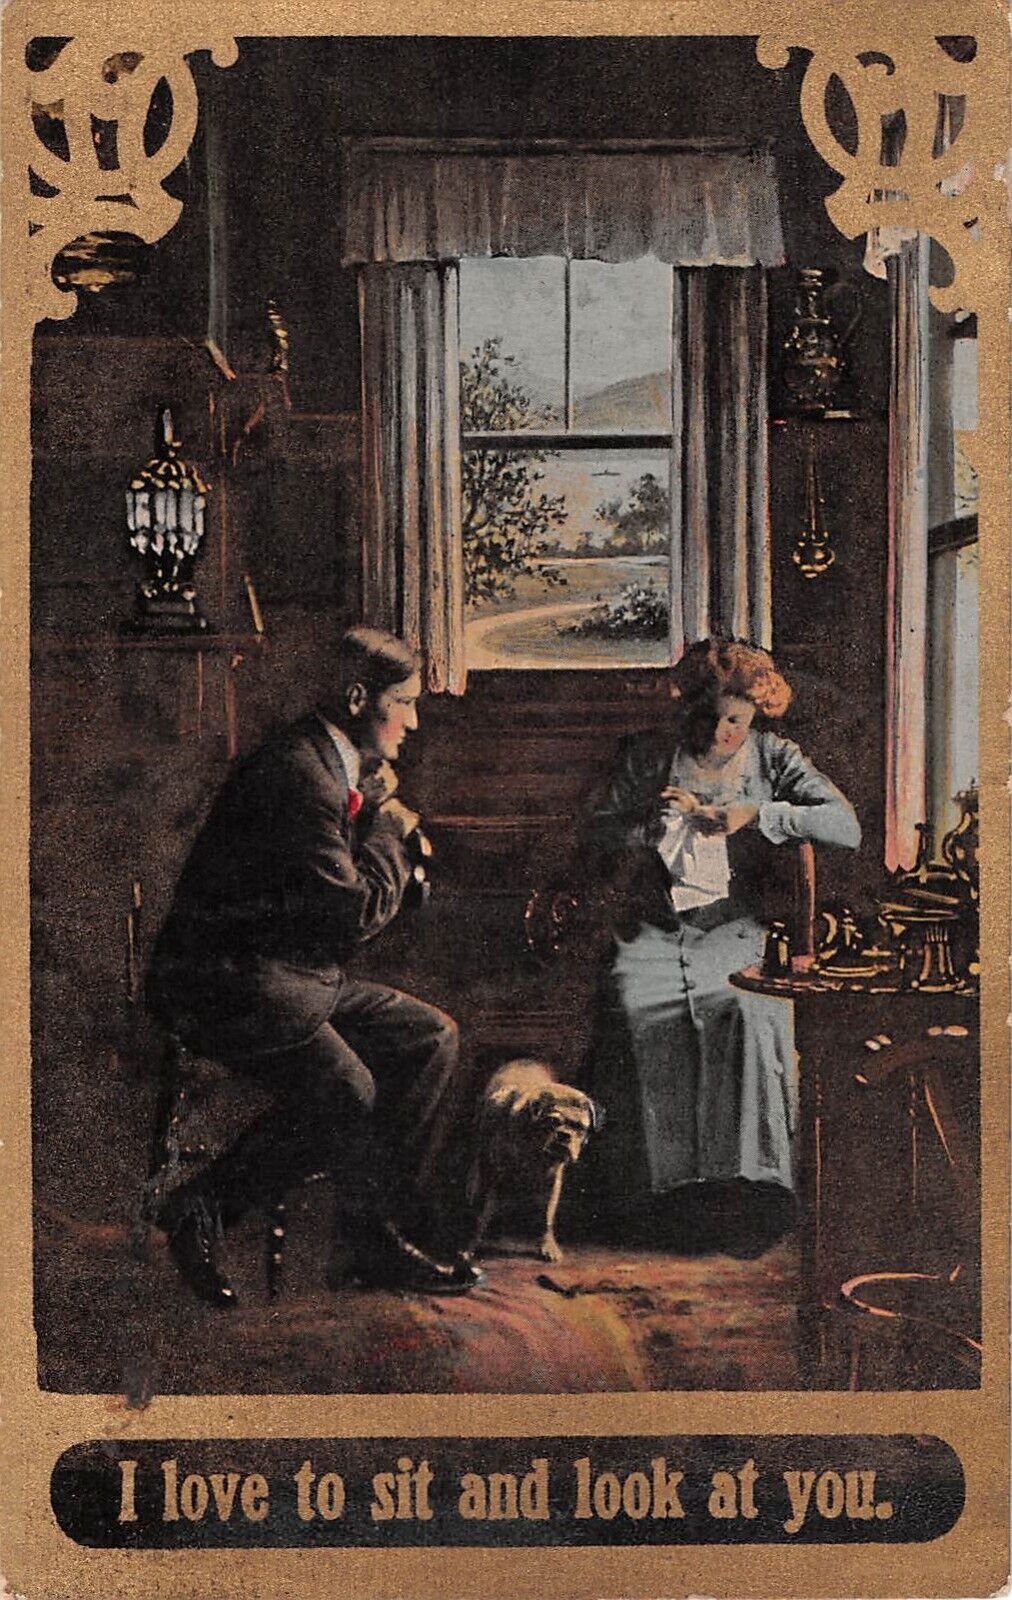 1909 Romantic PC of Lovers In the Parlor-Man Says-I Love To Sit & Look At You.